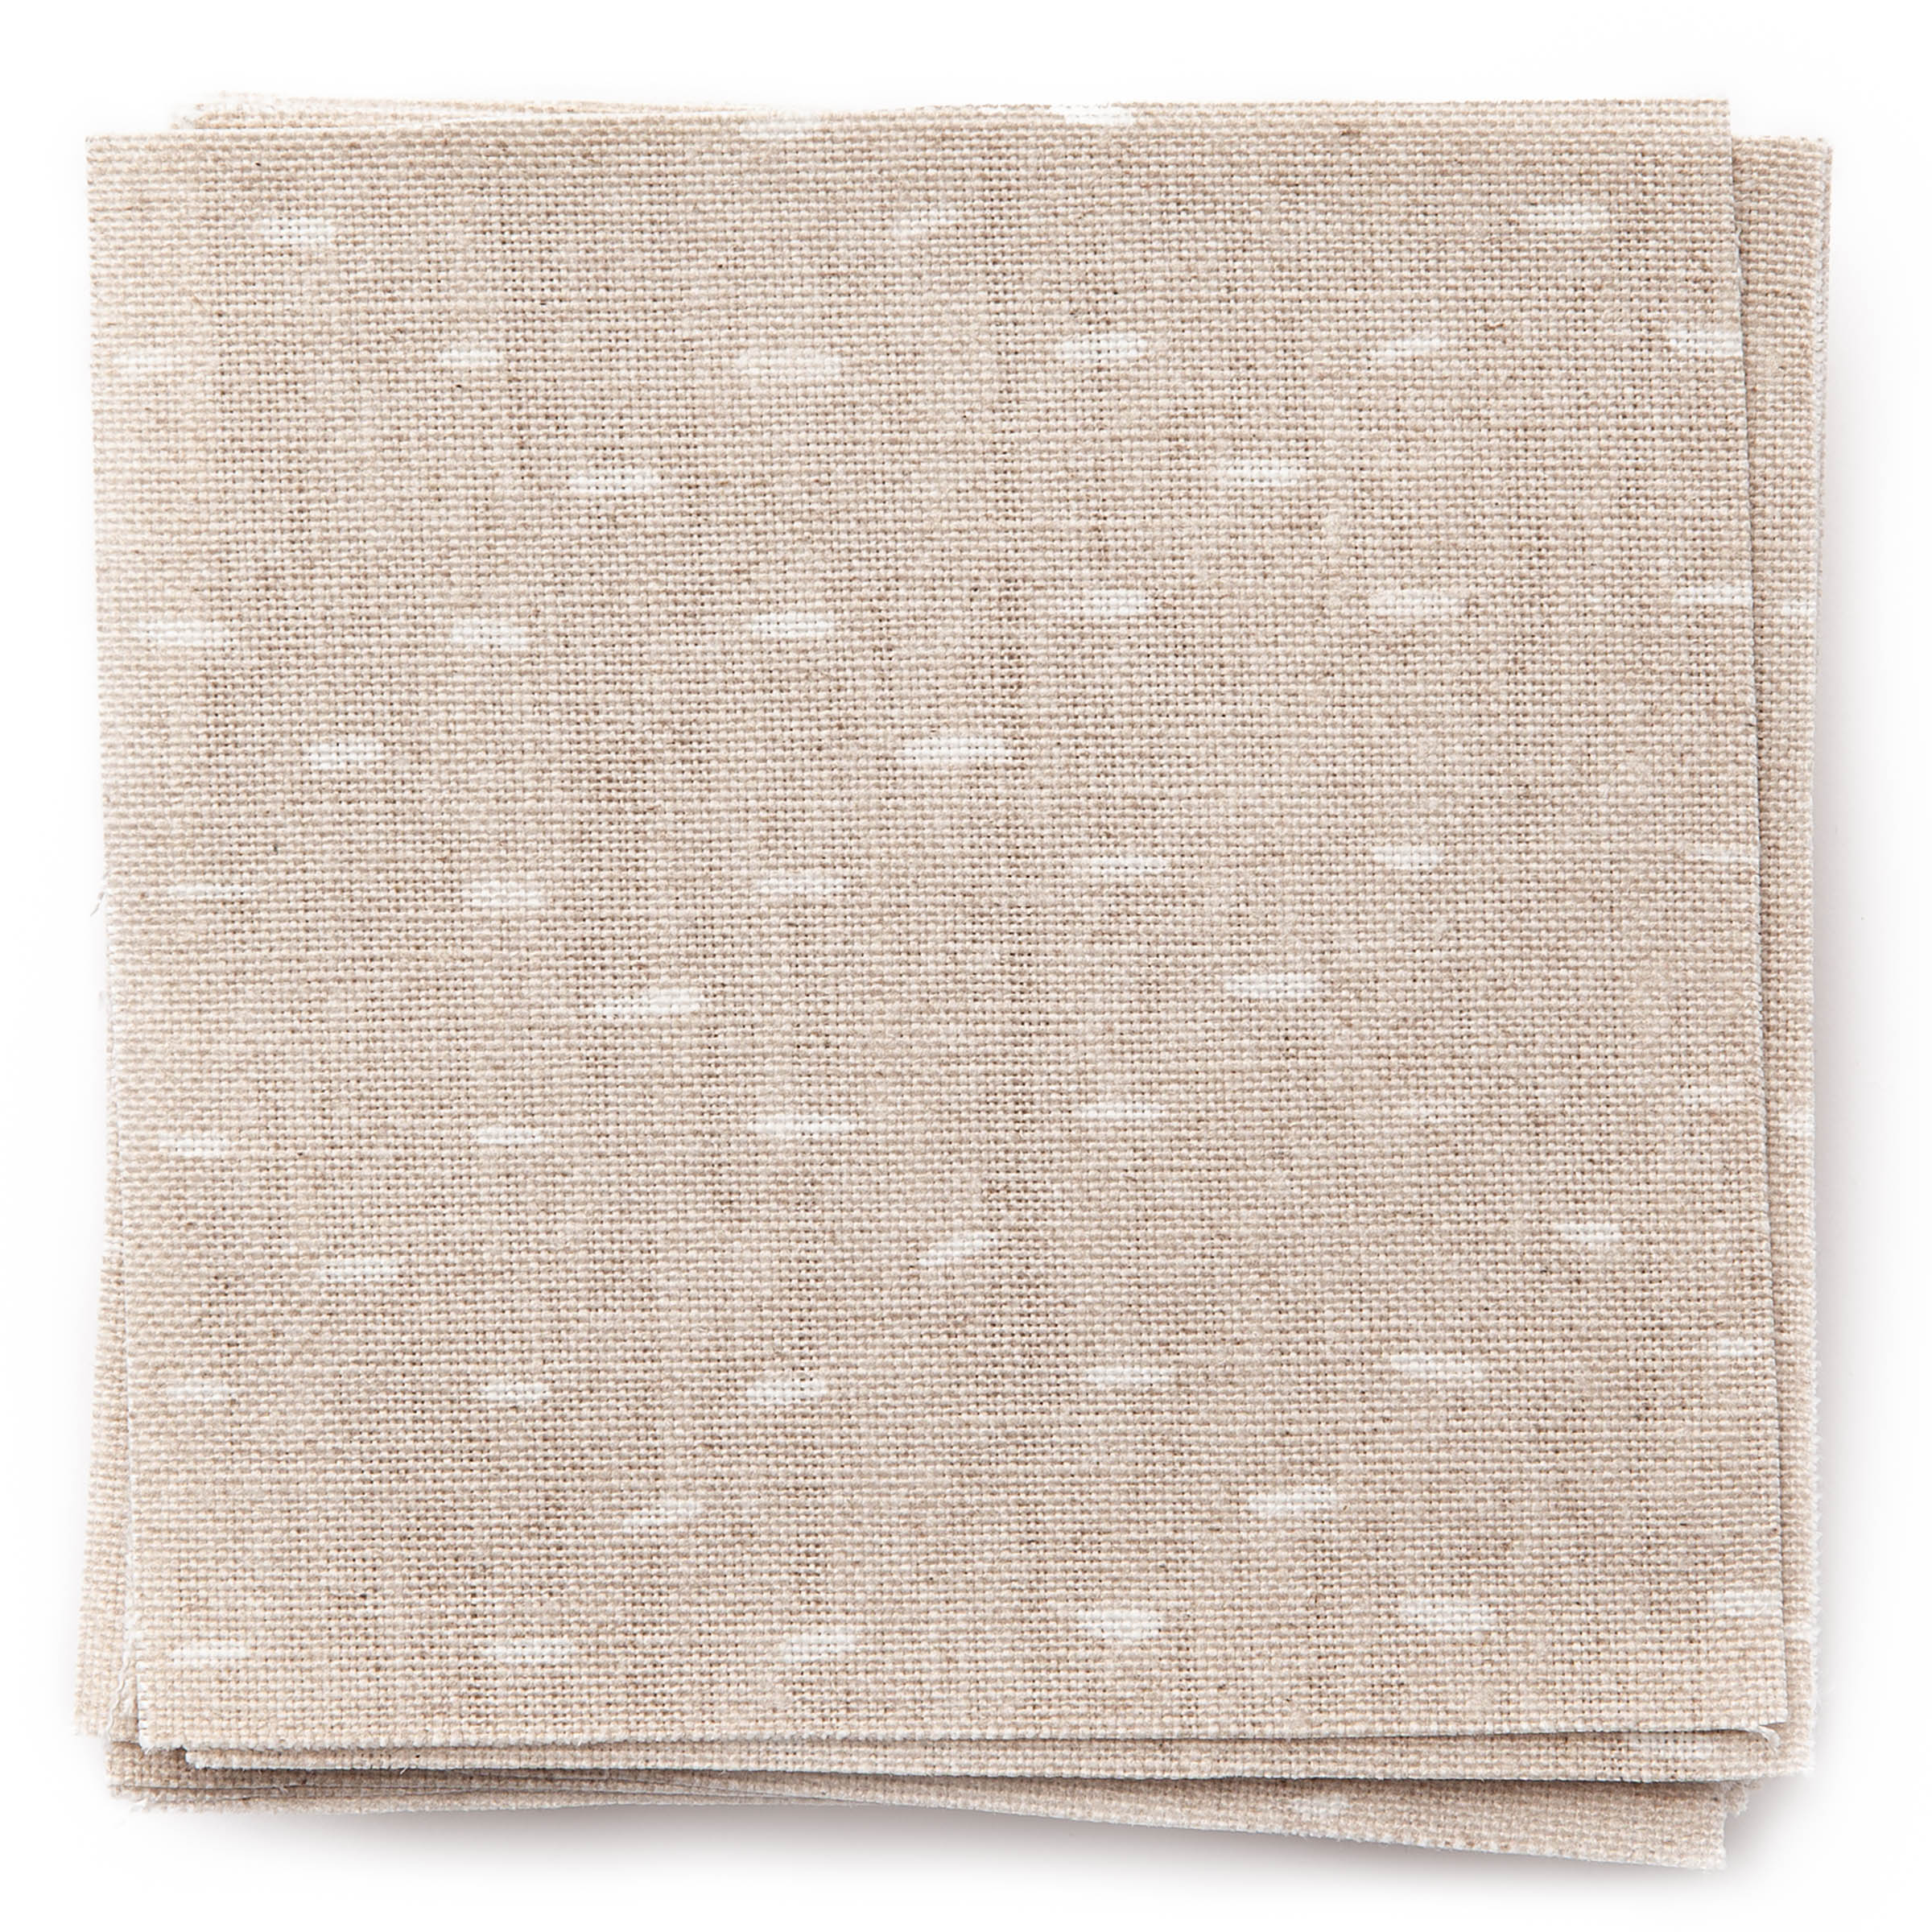 A stack of fabric swatches in a dotted diamond grid in white on a tan field.